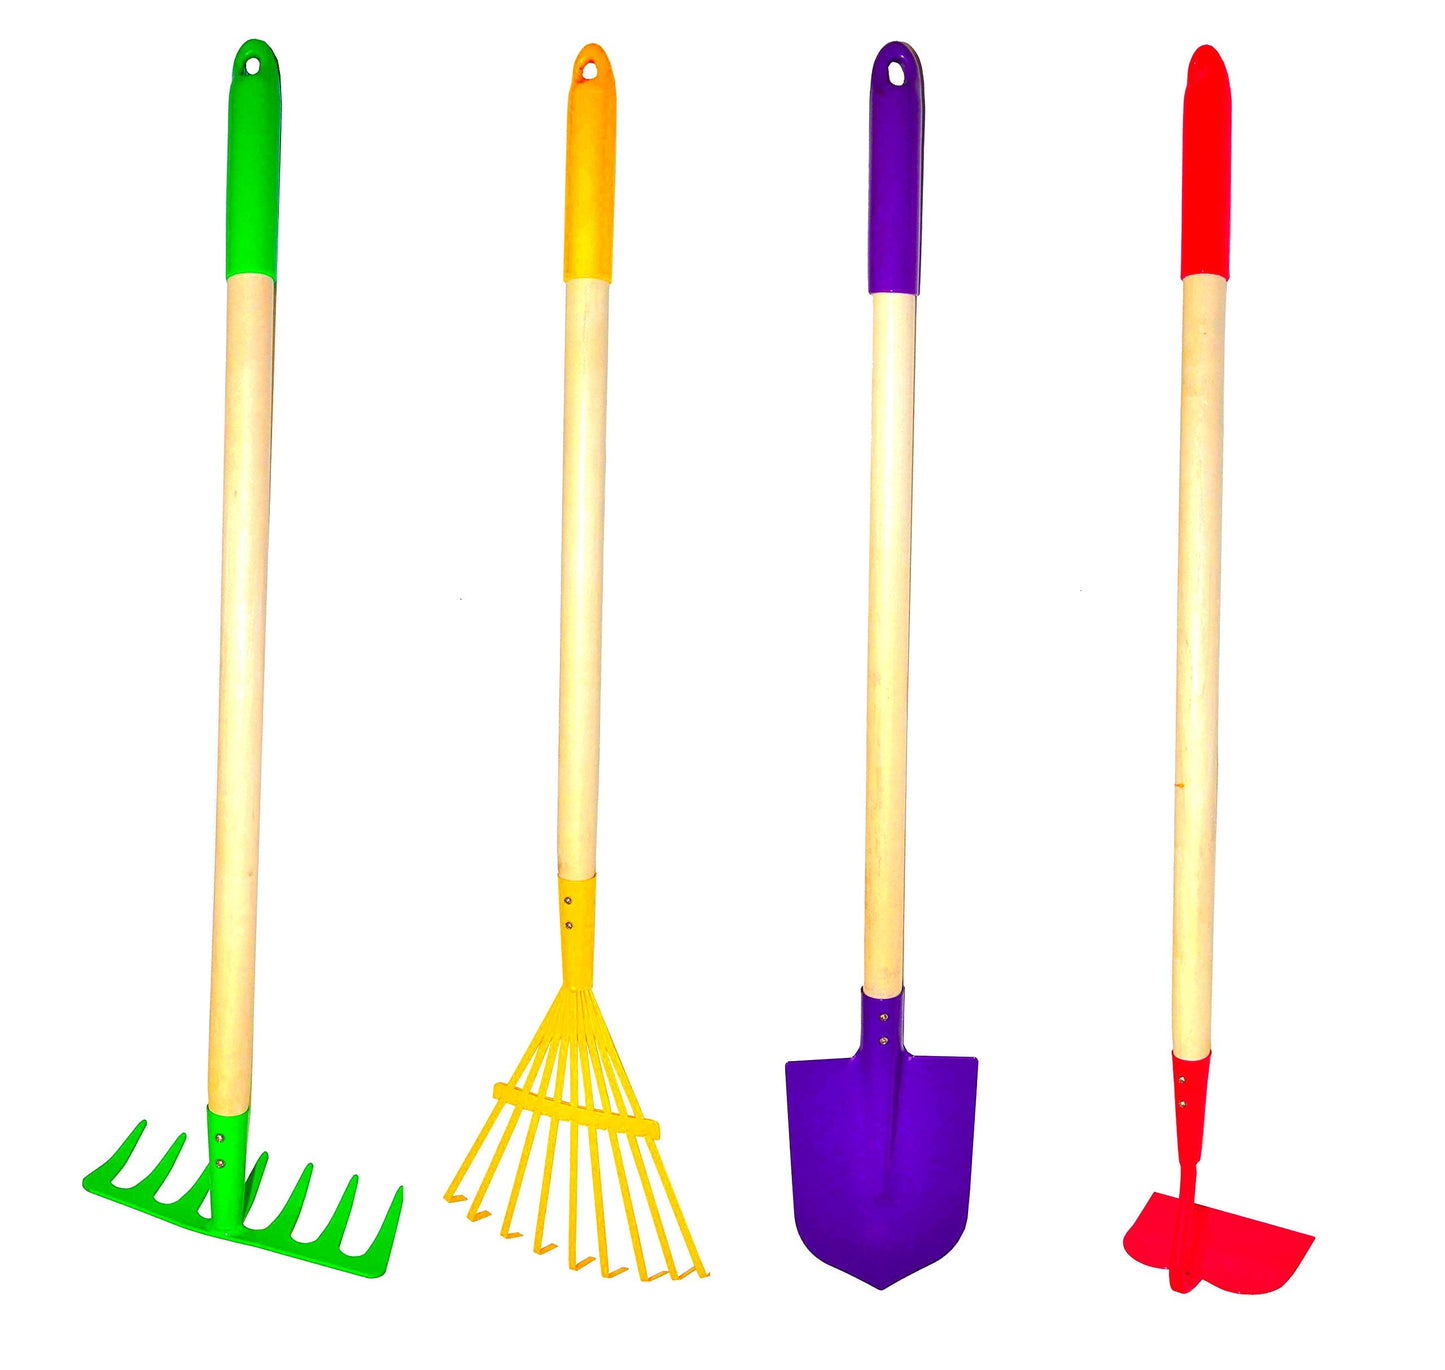 Kids Garden Tool Set Toy, Rake, Spade, Hoe and Leaf Rake, reduced size , made of sturdy steel heads and real wood handle, 4-Piece, Multicolored